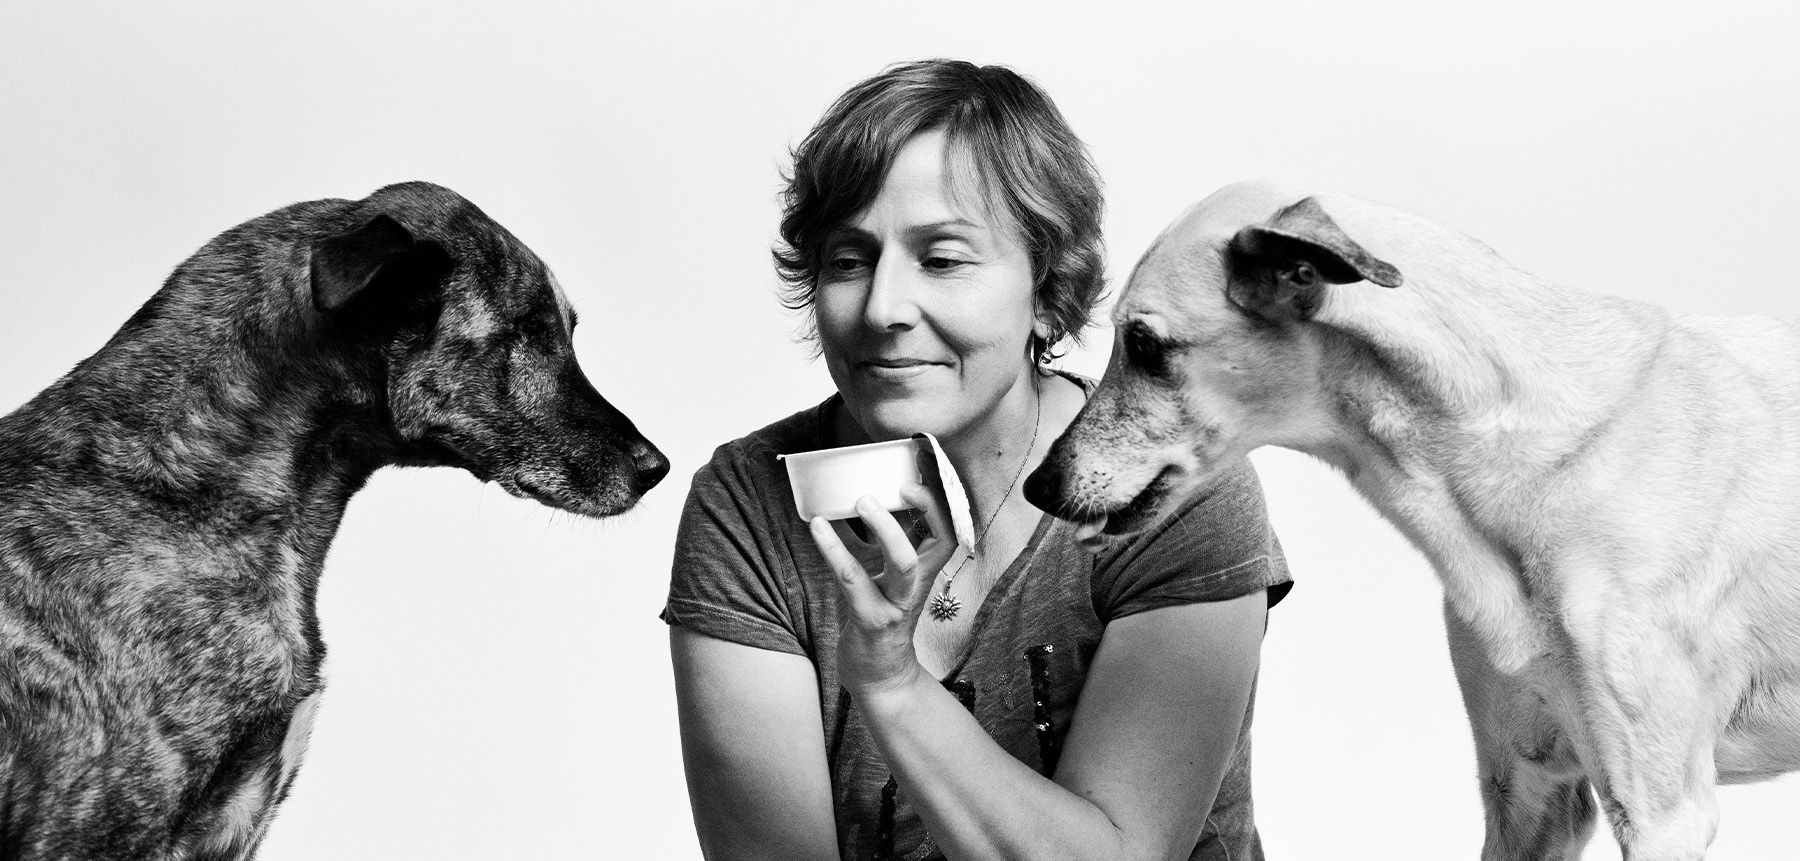 TAKE YOUR TIME Elke Vogelsang with her two dogs by Cornelia Köster